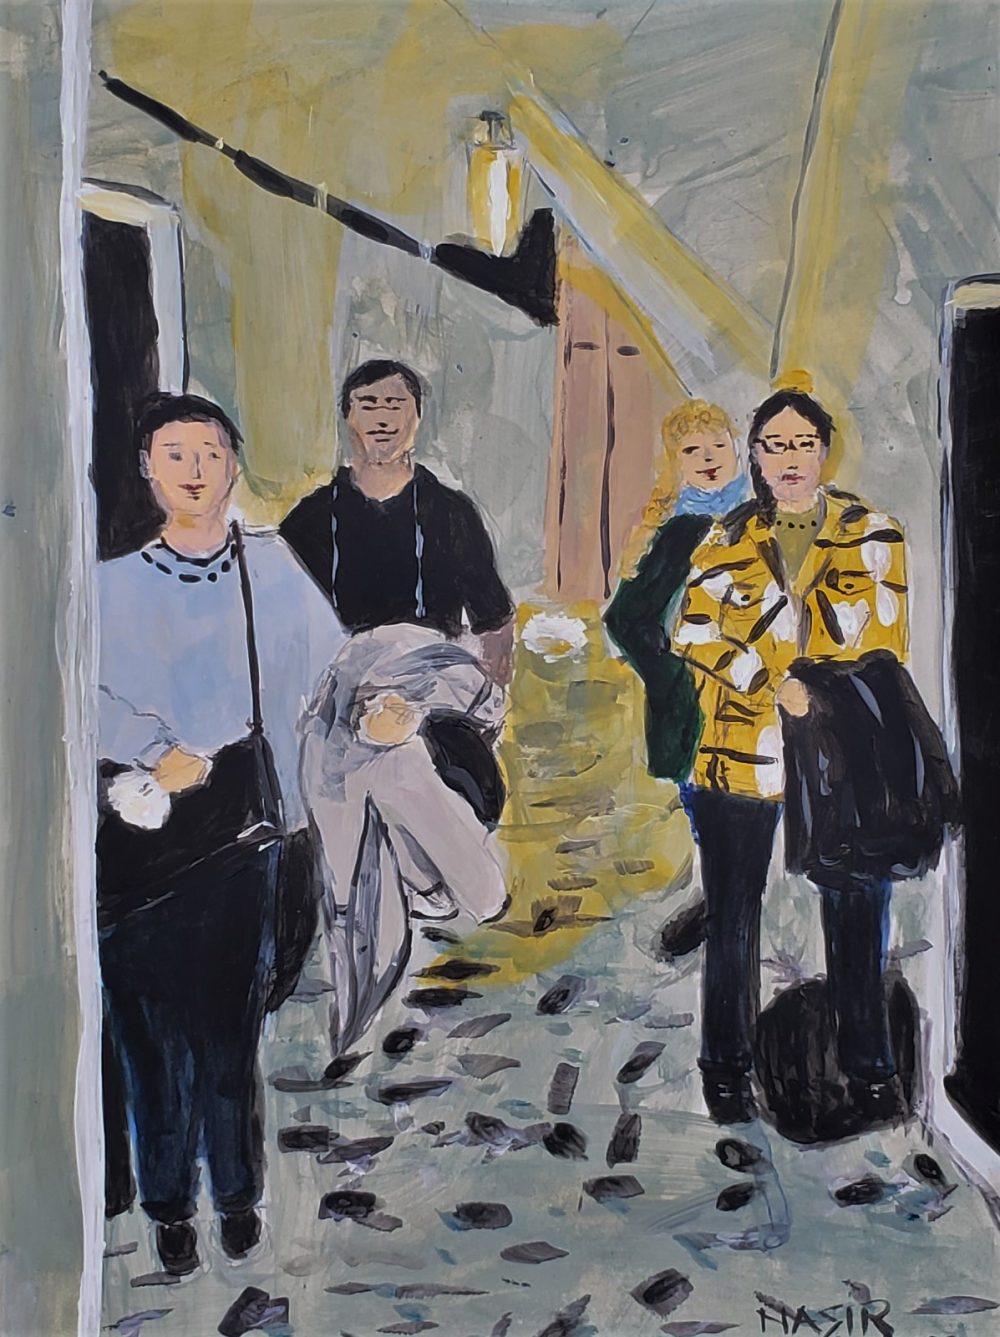 A painting of four people posing in a hallway.